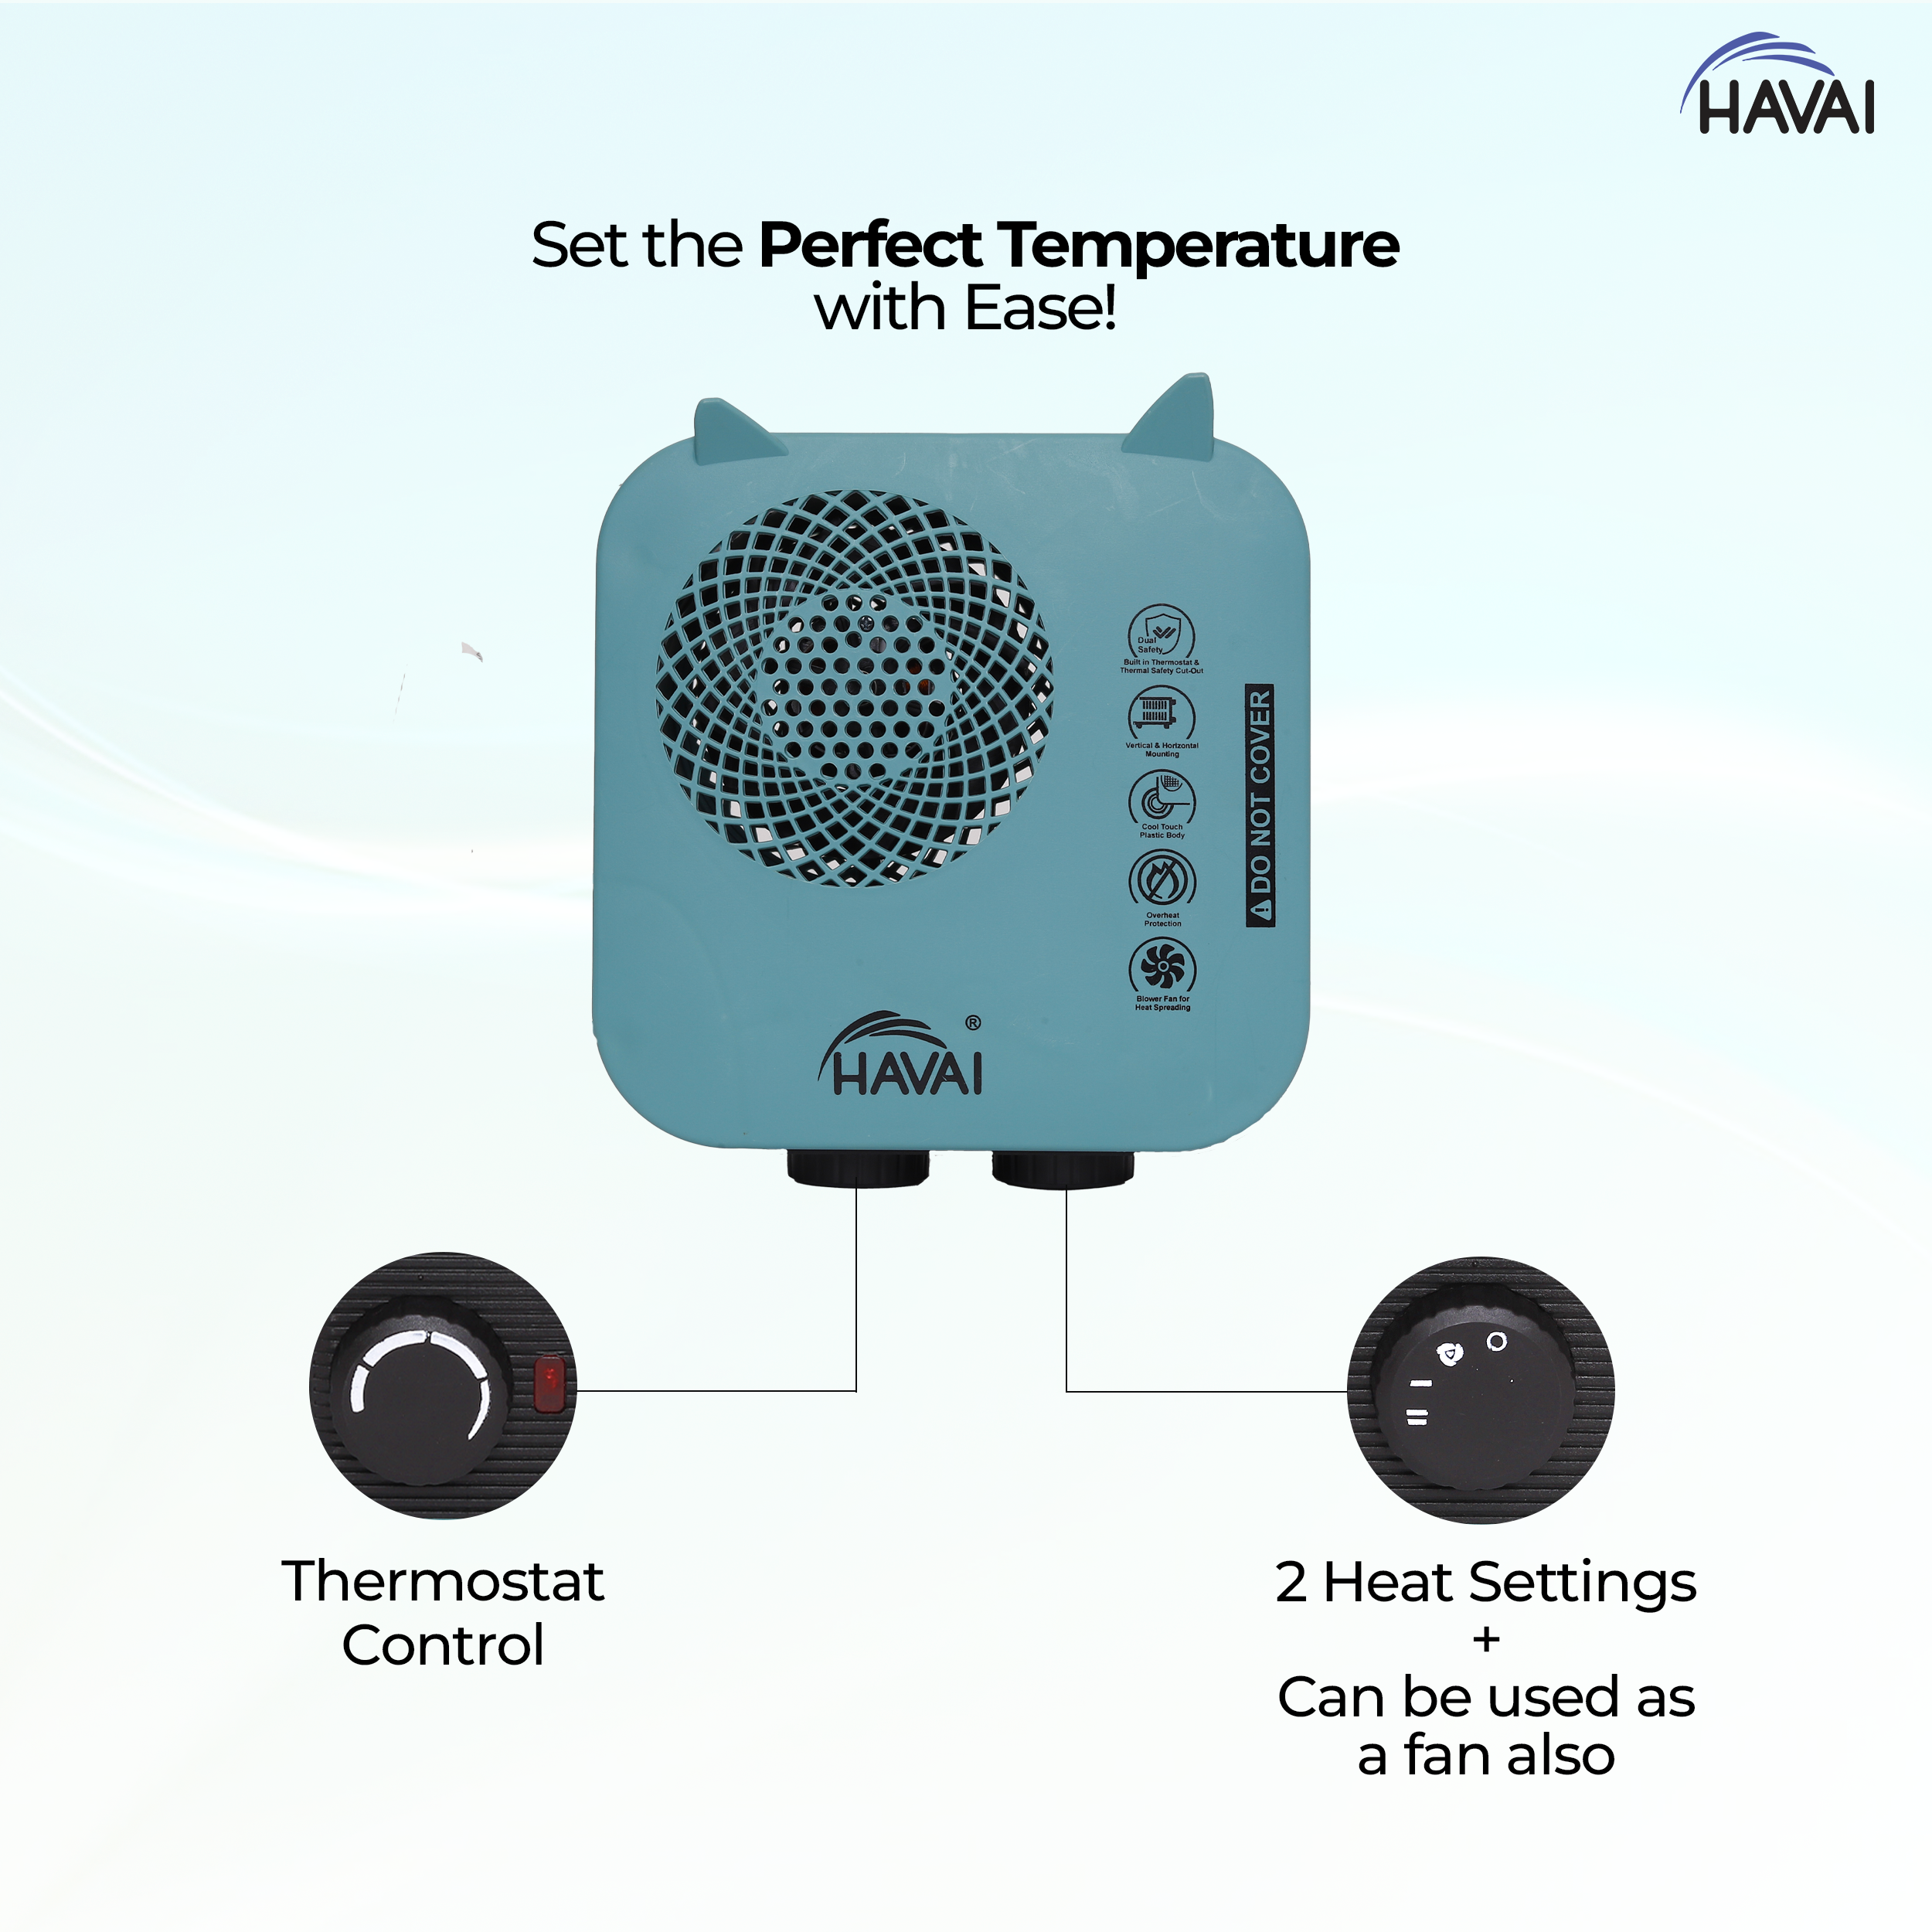 HAVAI Ace Pro Fan Heater 2000/1000 Watts Room Heater with Handle (ISI Certified) Green